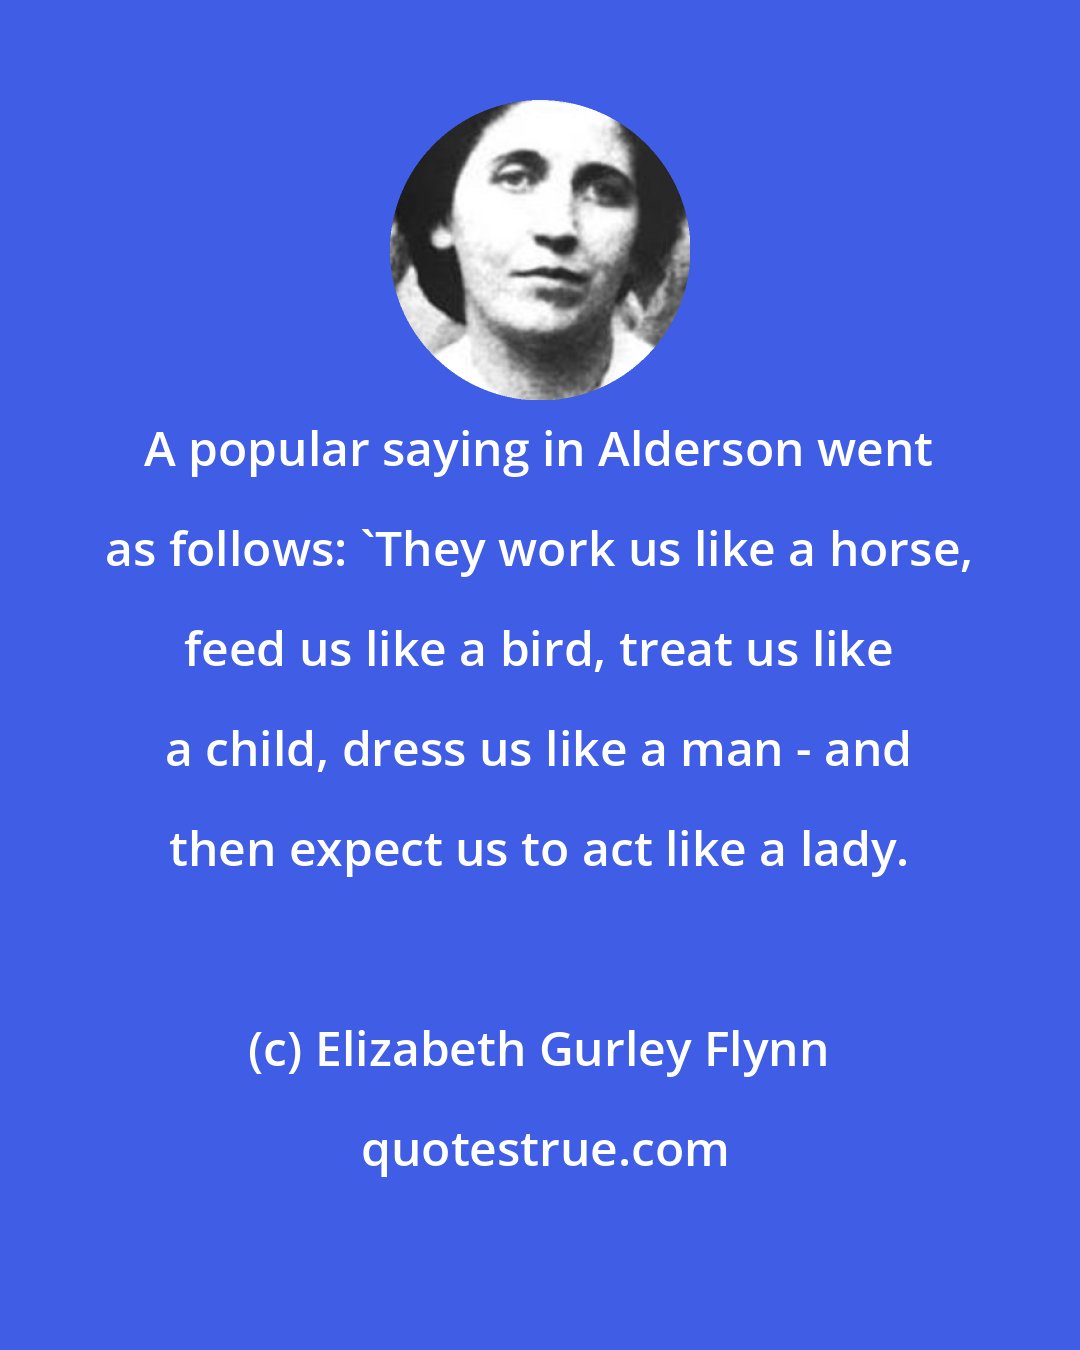 Elizabeth Gurley Flynn: A popular saying in Alderson went as follows: 'They work us like a horse, feed us like a bird, treat us like a child, dress us like a man - and then expect us to act like a lady.